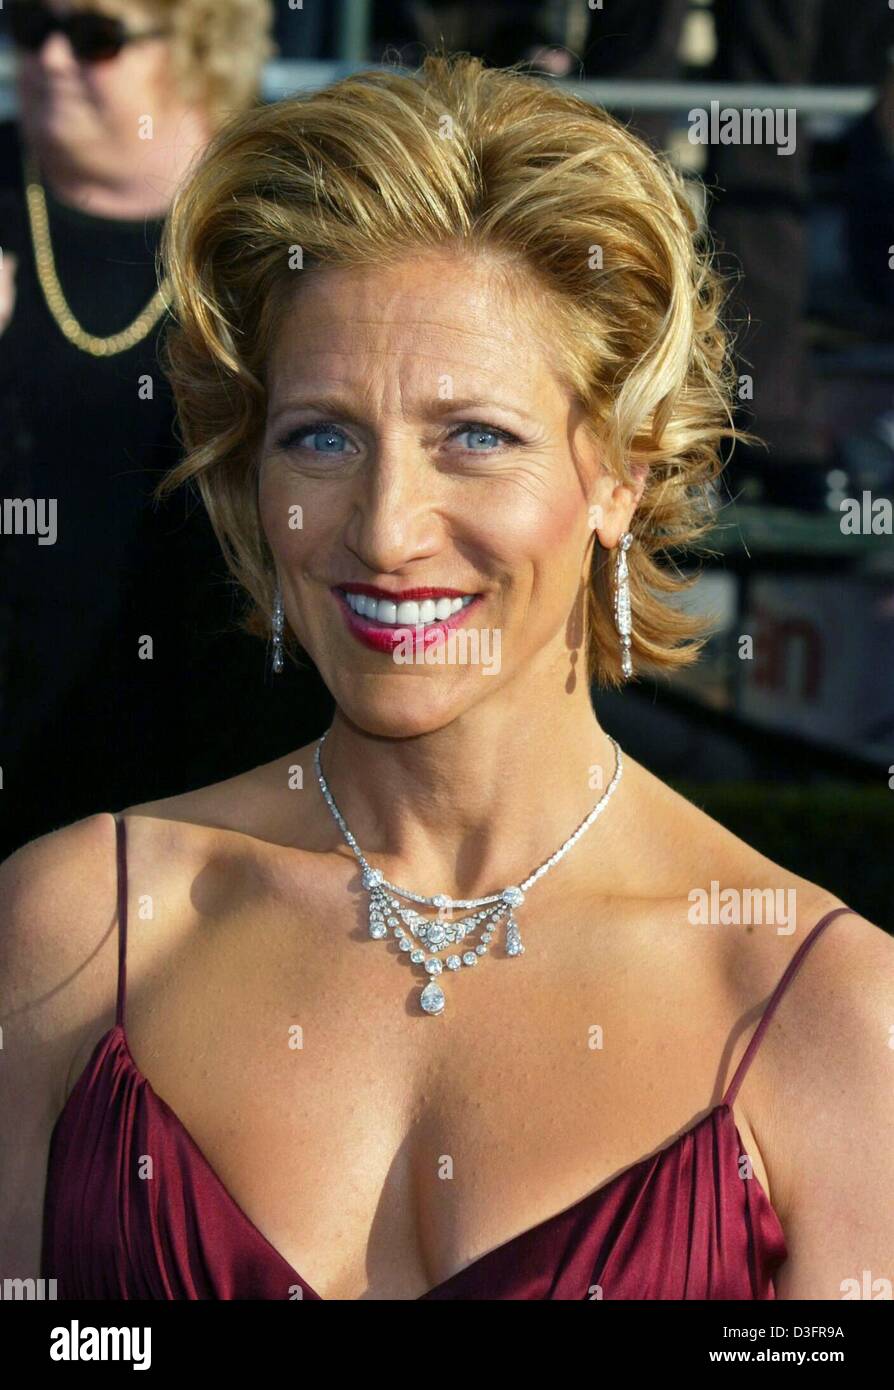 (dpa) - The US actress of Swedish and Italian heritage Edie Falco ('The Sopranos', 'Sunshine State', 'Hurricane') arrives at the Screen Actors Guild Awards in Los Angeles, California, 9 March 2003. She received an award for her part in the TV series 'The Sopranos'. Stock Photo